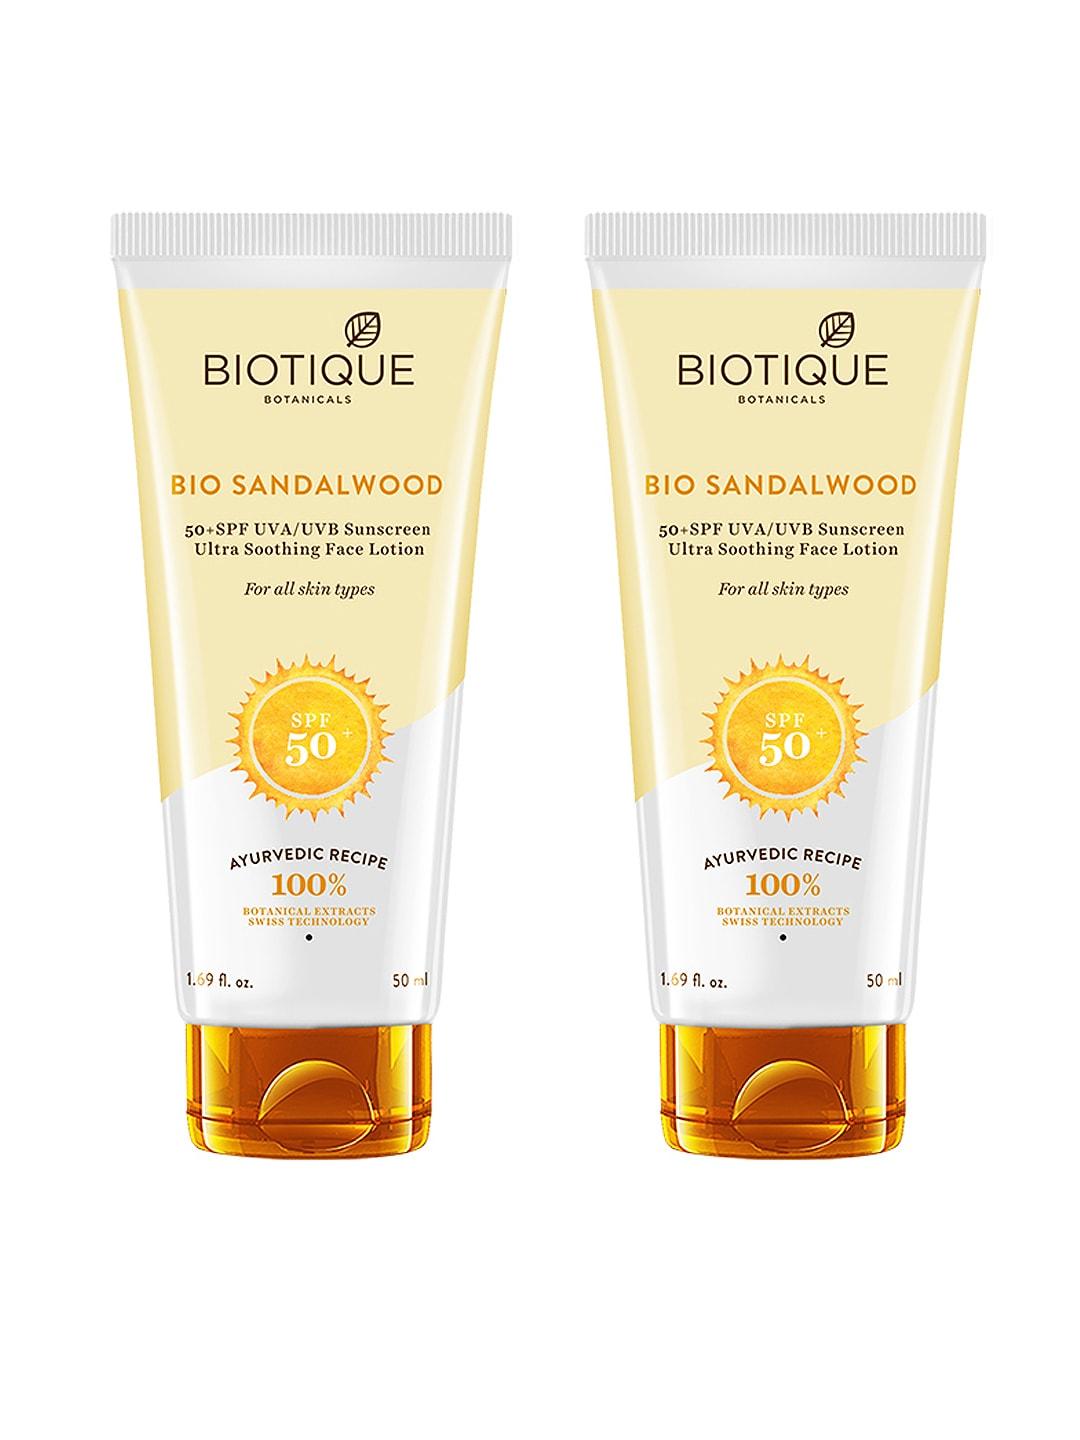 biotique-set-of-2-bio-sandalwood-spf-50+-ultra-soothing-sunscreen-lotions